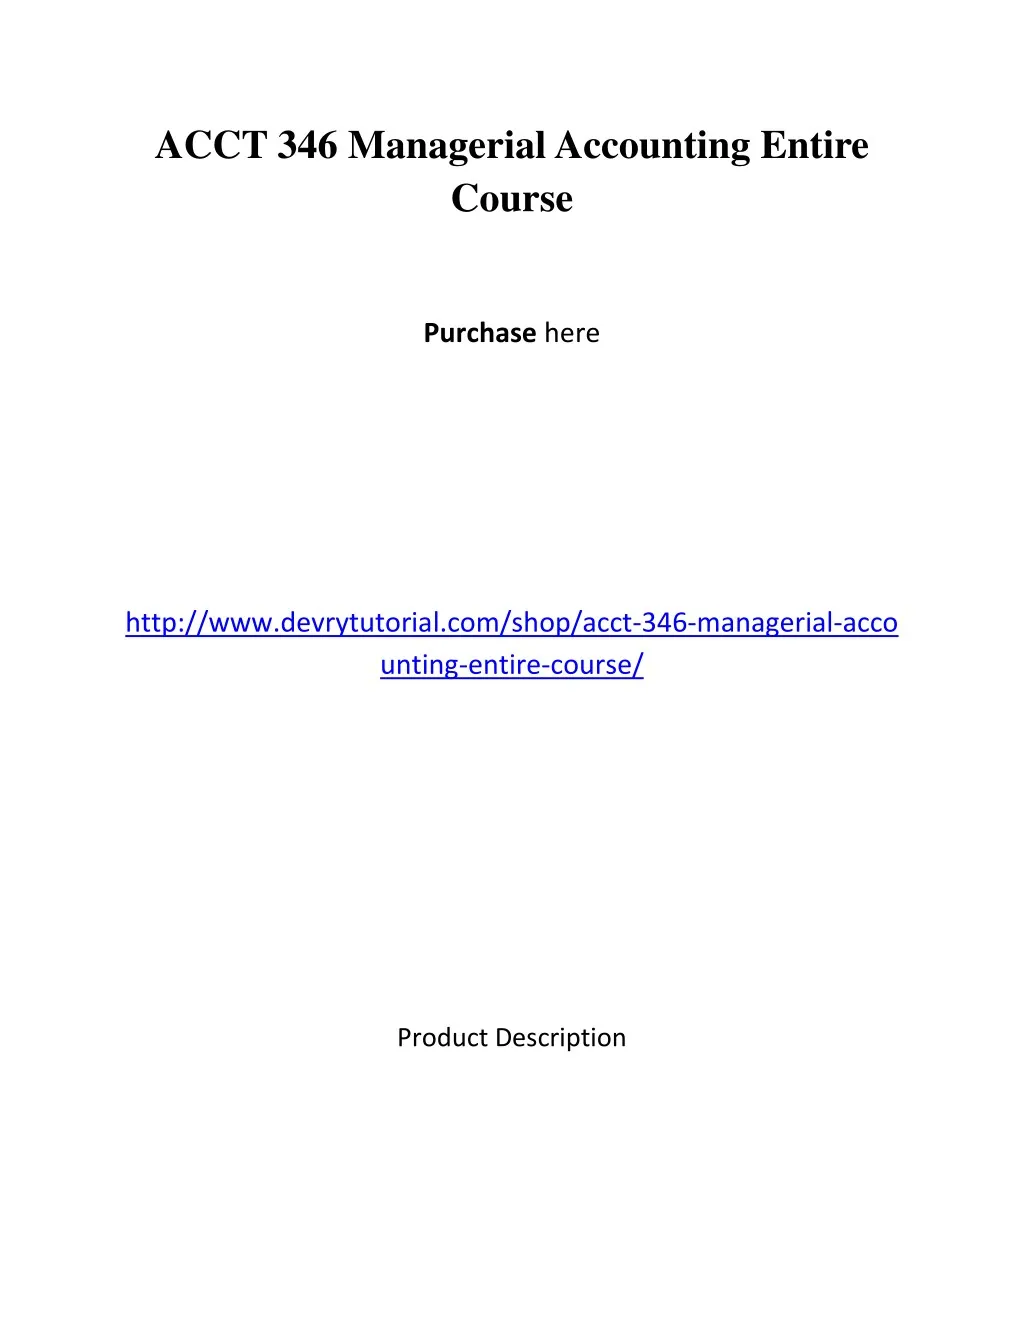 acct 346 managerial accounting entire course